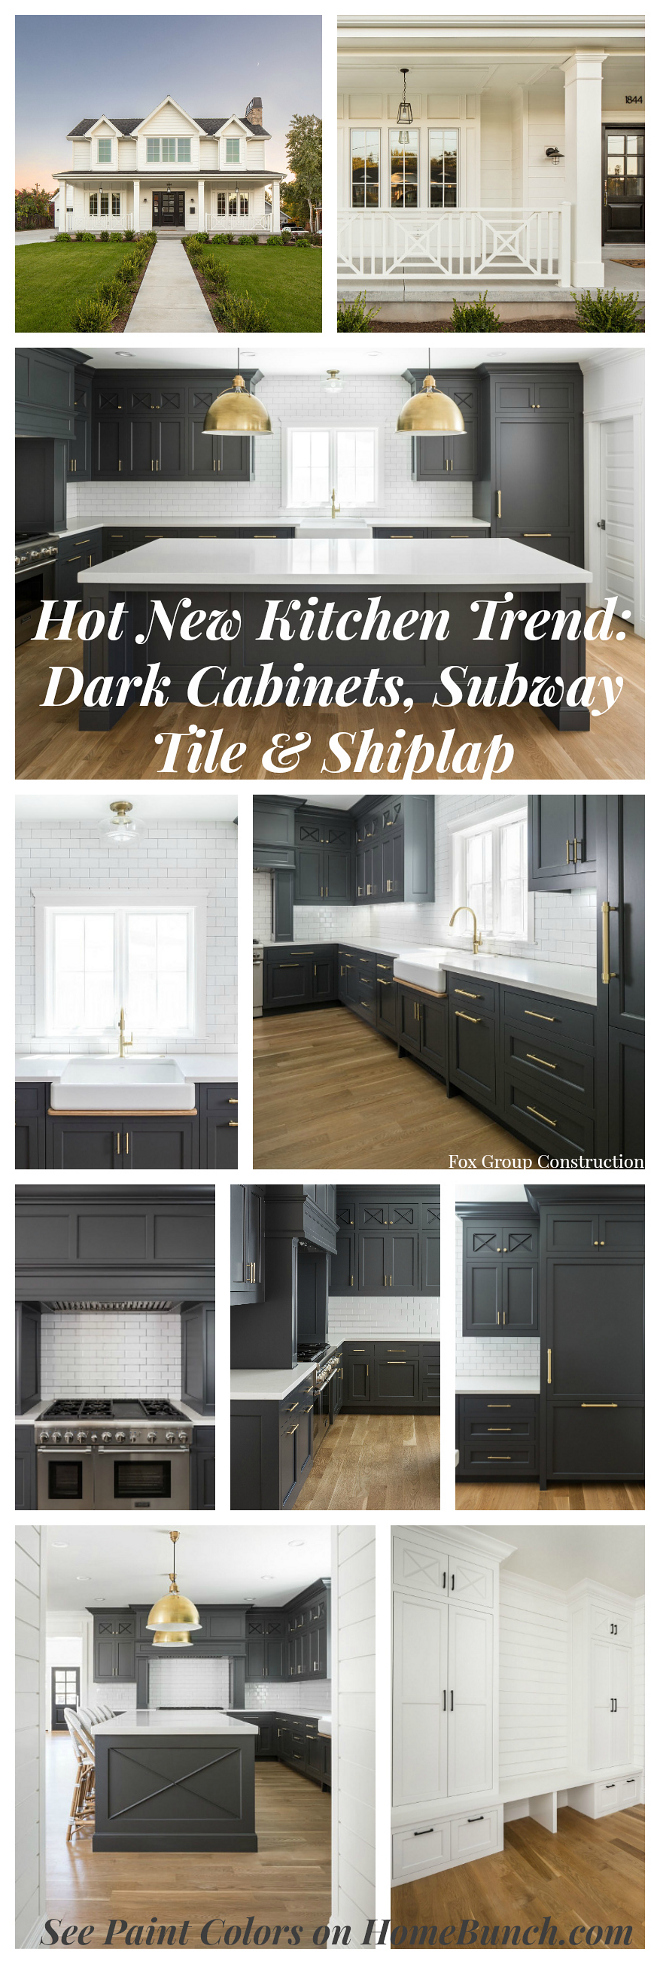 Hot New Kitchen Trend Dark Cabinets, Subway Tile & Shiplap. See paint colors on Home Bunch. #NewKitchenTrend #DarkCabinets #SubwayTile #shiplap #paintcolor